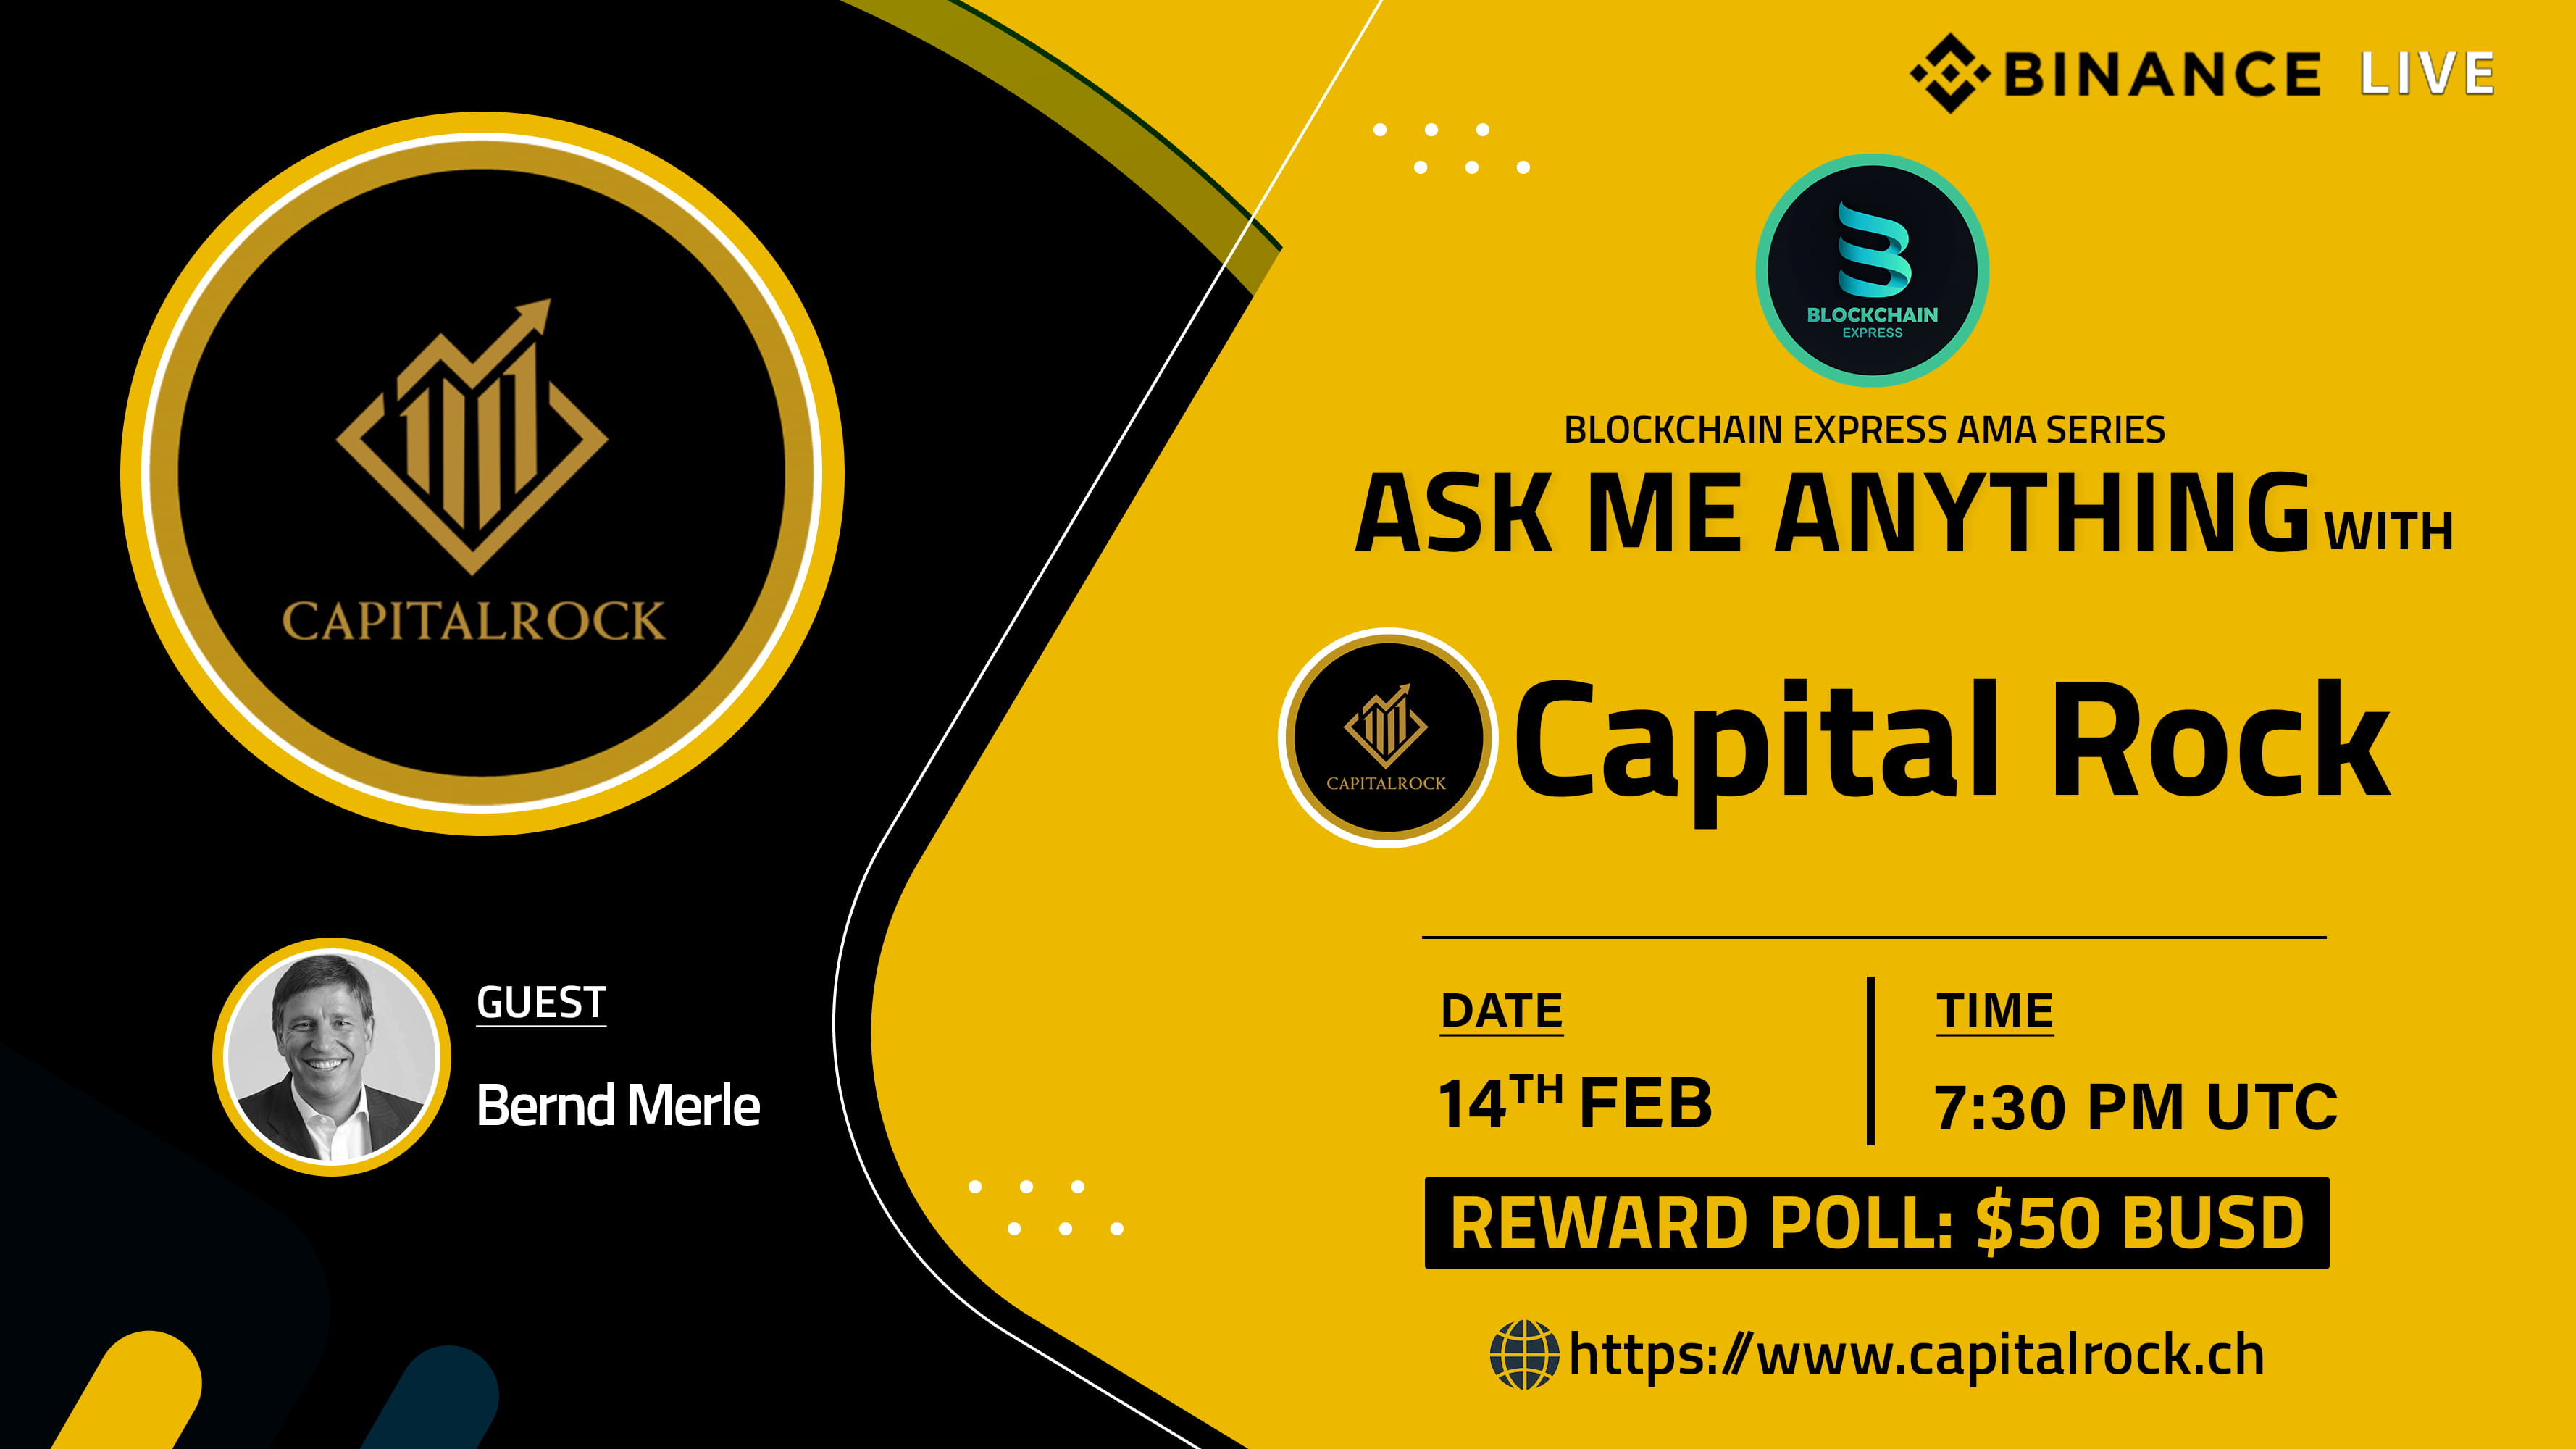 ₿lockchain Express will be hosting an session with" Capital Rock "